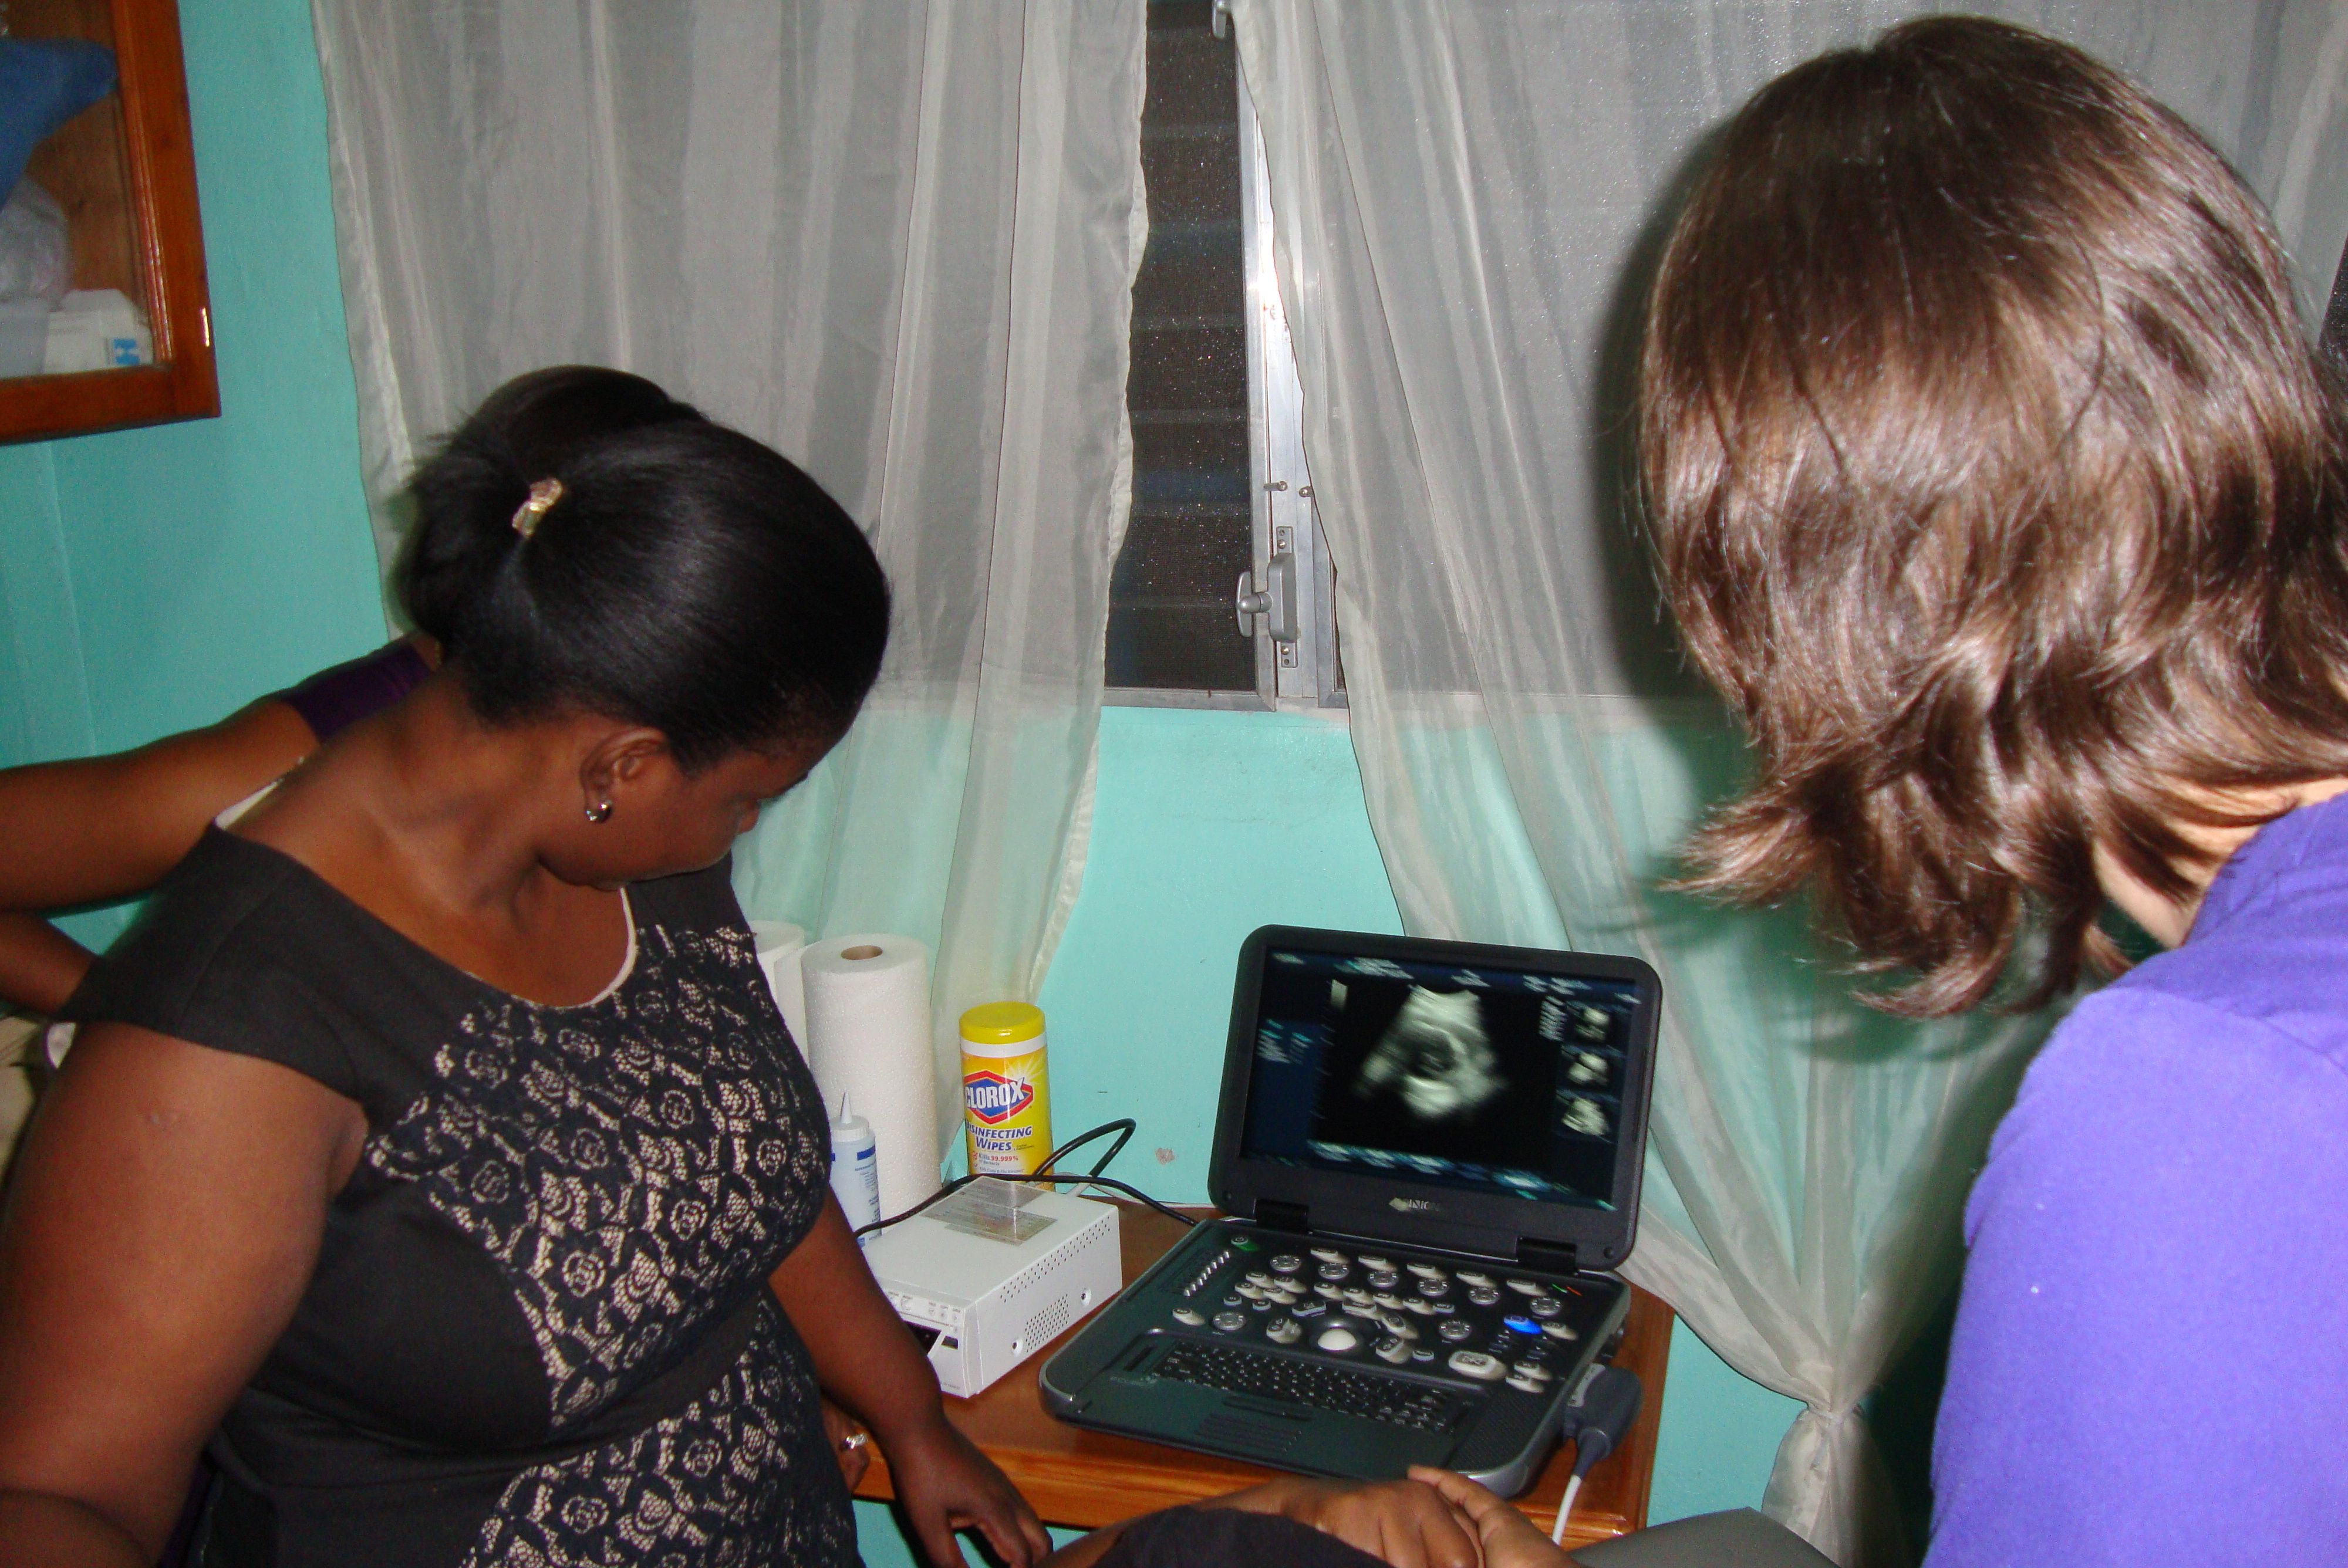 Each doctor received sonography training.